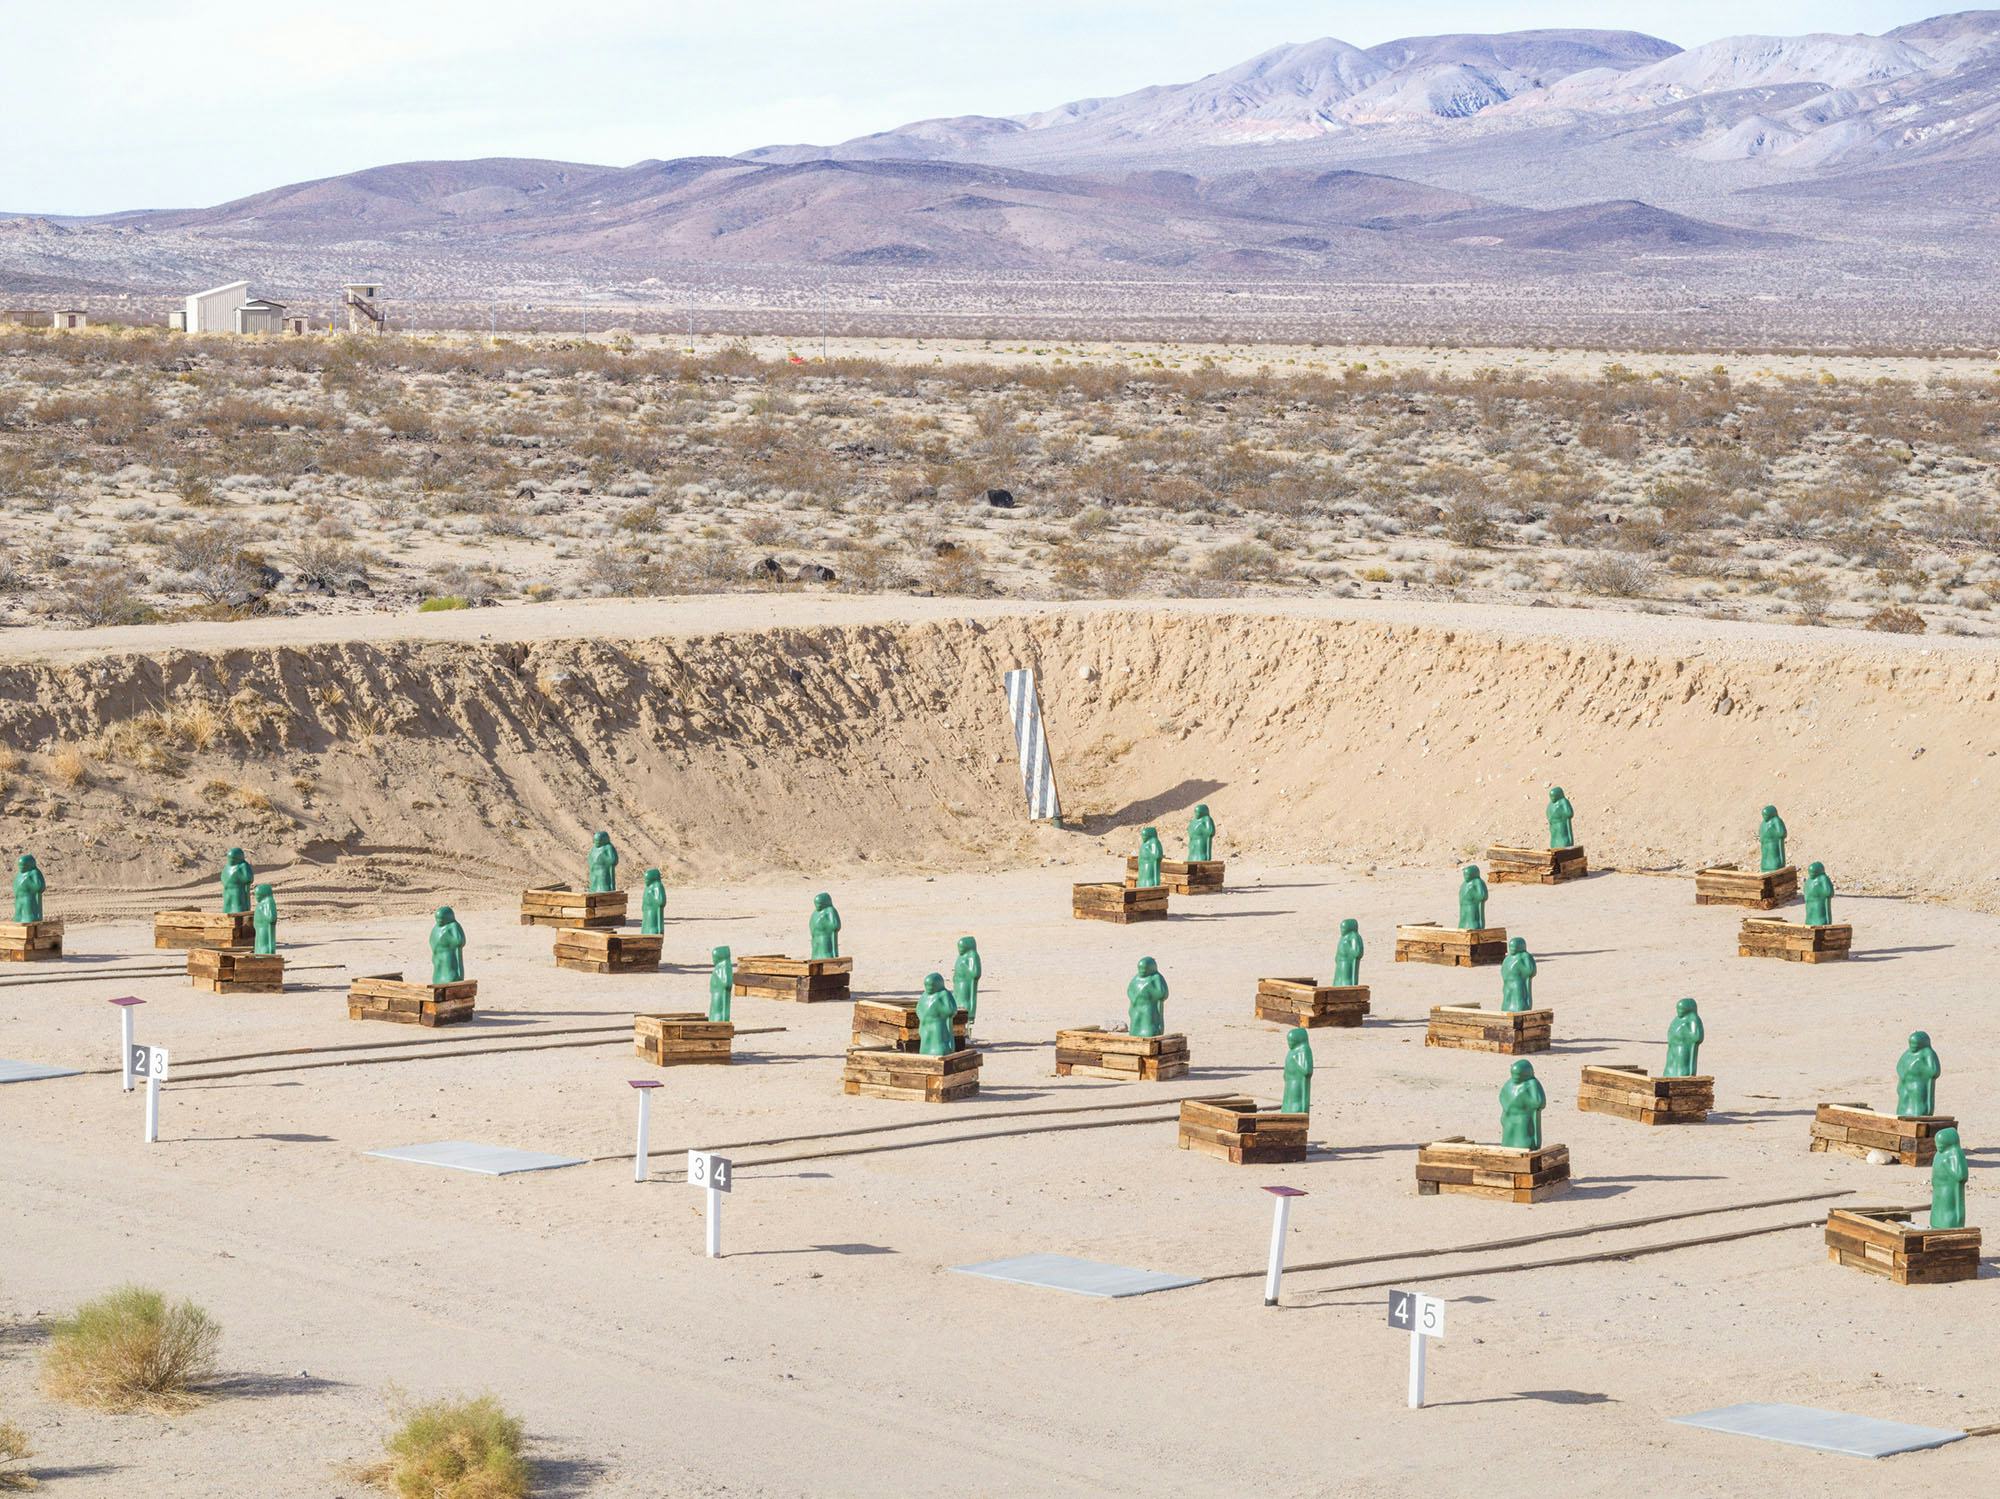 Shooting range with green figures lined up as targets, in the middle of a mountainous desert © Andrea Orejarena & Caleb Stein